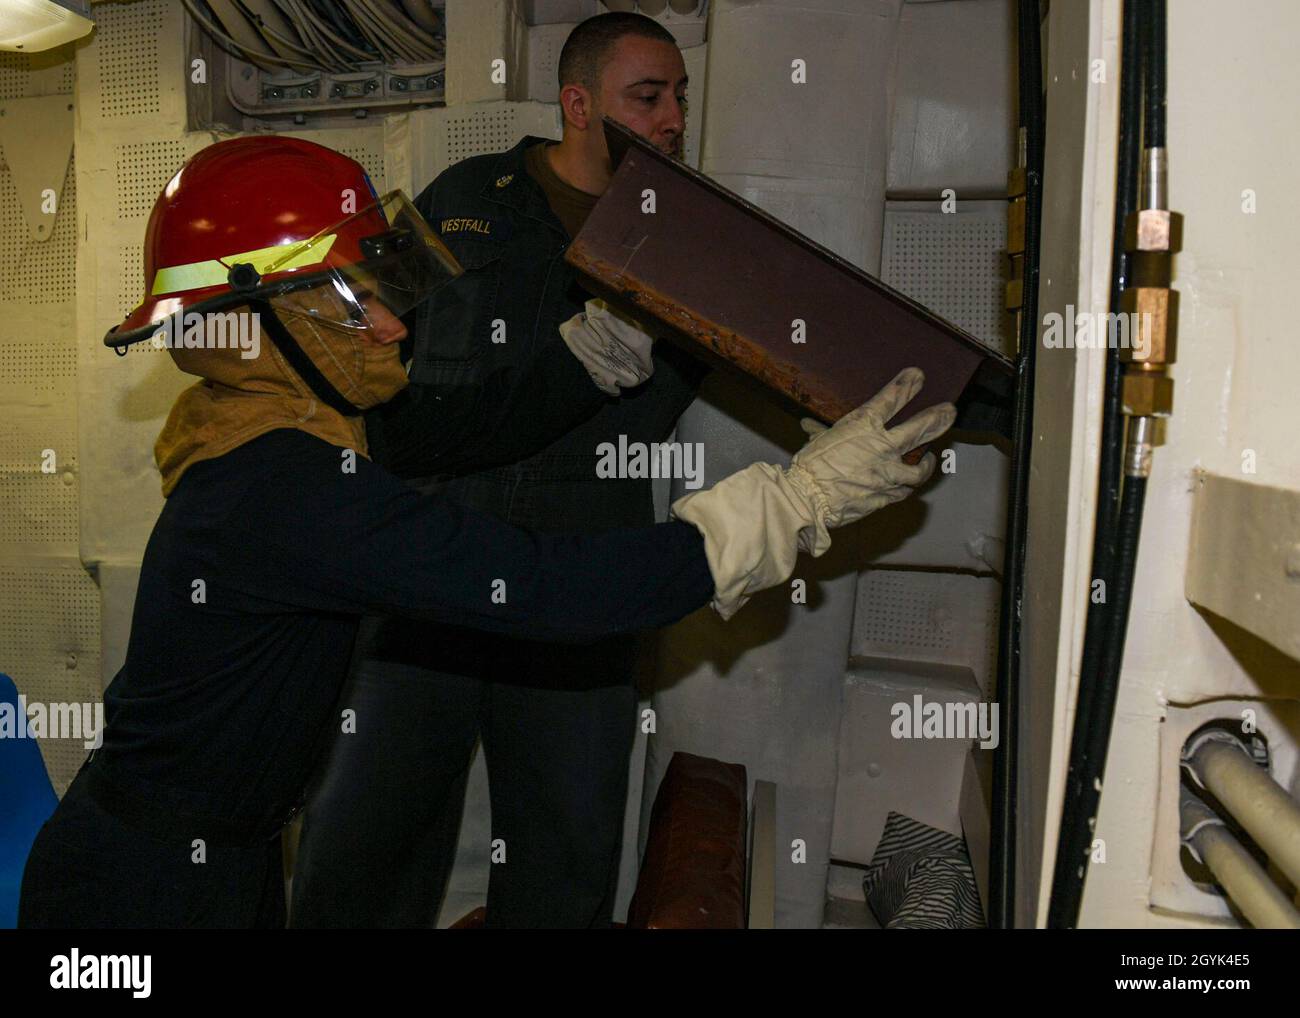 200113-N-PC620-0026 ARABIAN SEA (Jan. 13, 2020) Damage Control Fireman Alexis Rodriguez-Rivera places a box patch over simulated bulkhead damage during an at-sea fire party drill aboard the guided-missile cruiser USS Normandy (CG 60). The Normandy is part of the Harry S. Truman Carrier Strike Group and is deployed to the U.S. 5th Fleet area of operations in support of naval operations to ensure maritime stability and security in the Central Region, connecting the Mediterranean and Pacific through the western Indian Ocean and three strategic choke points. (U.S. Navy photo by Mass Communication Stock Photo